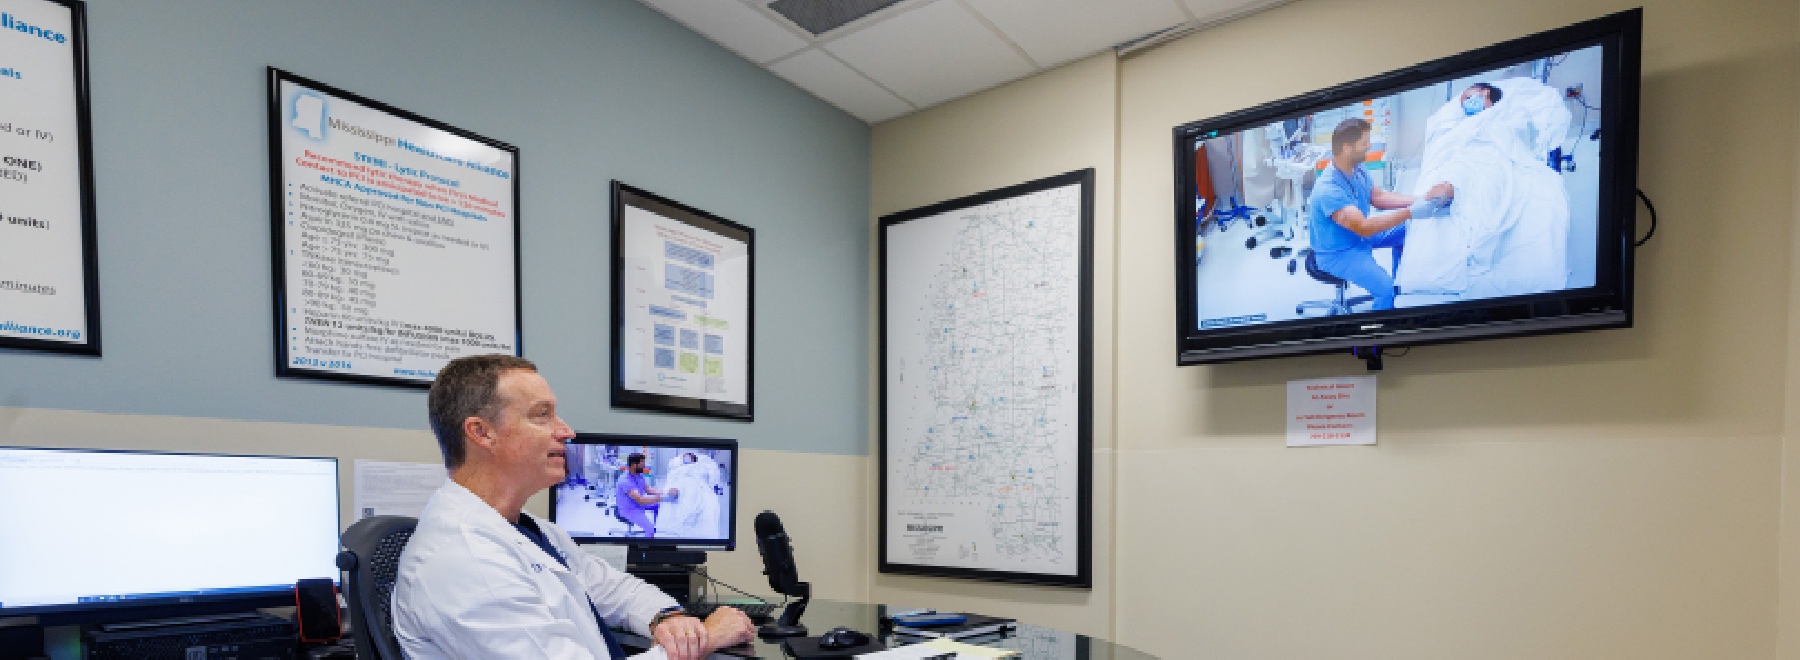 Photo of an off-site emergency room physician collaborating with an on-site ER doctor via telehealth technology